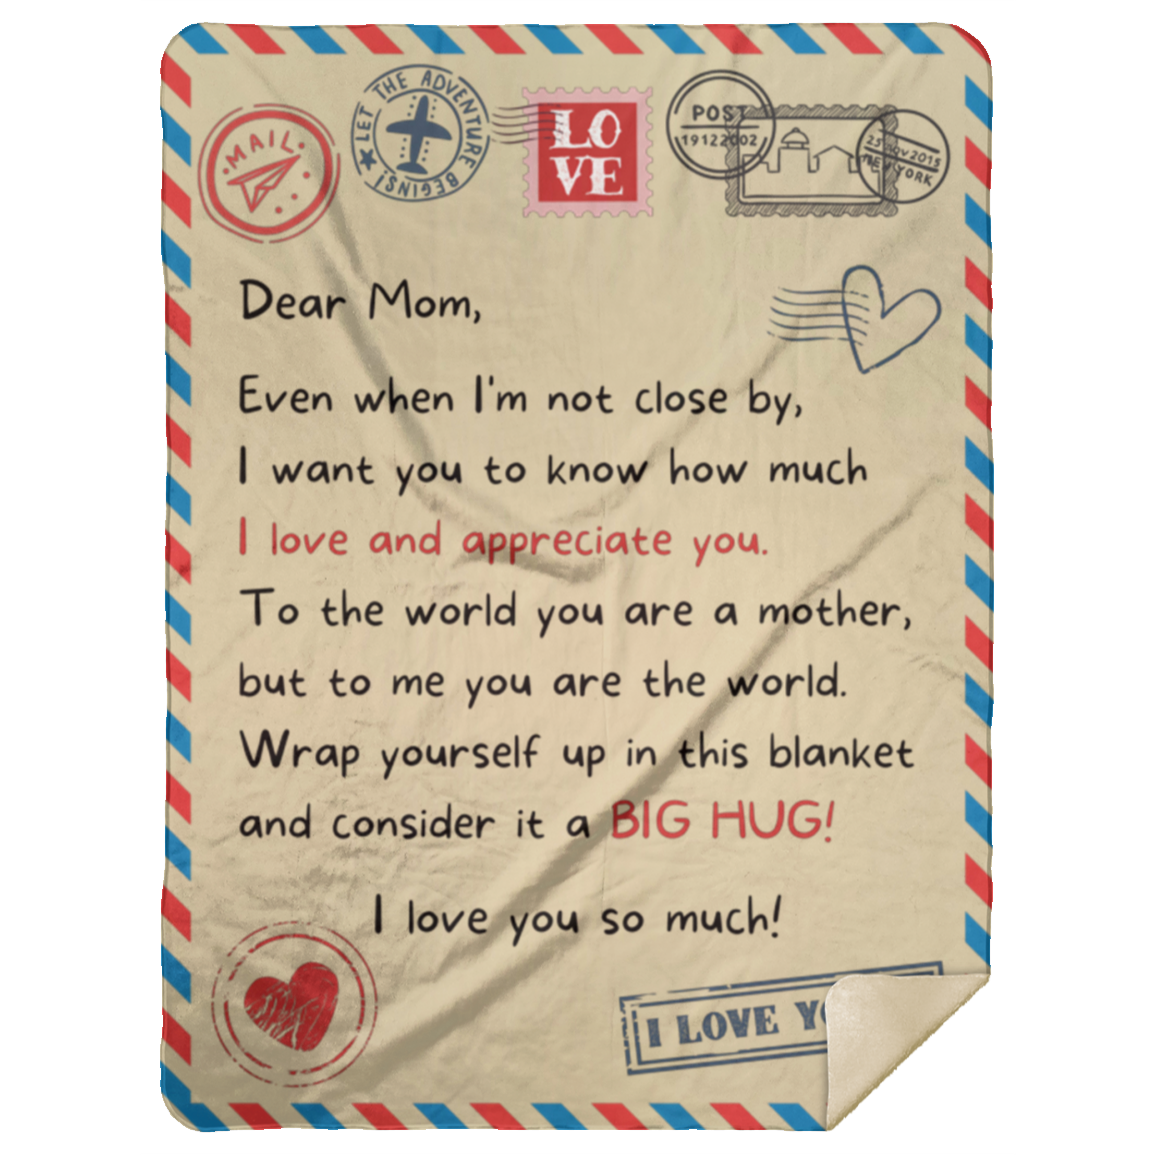 Letter to Mom | I Love and Appreciate You | Blanket from Son/Daughter